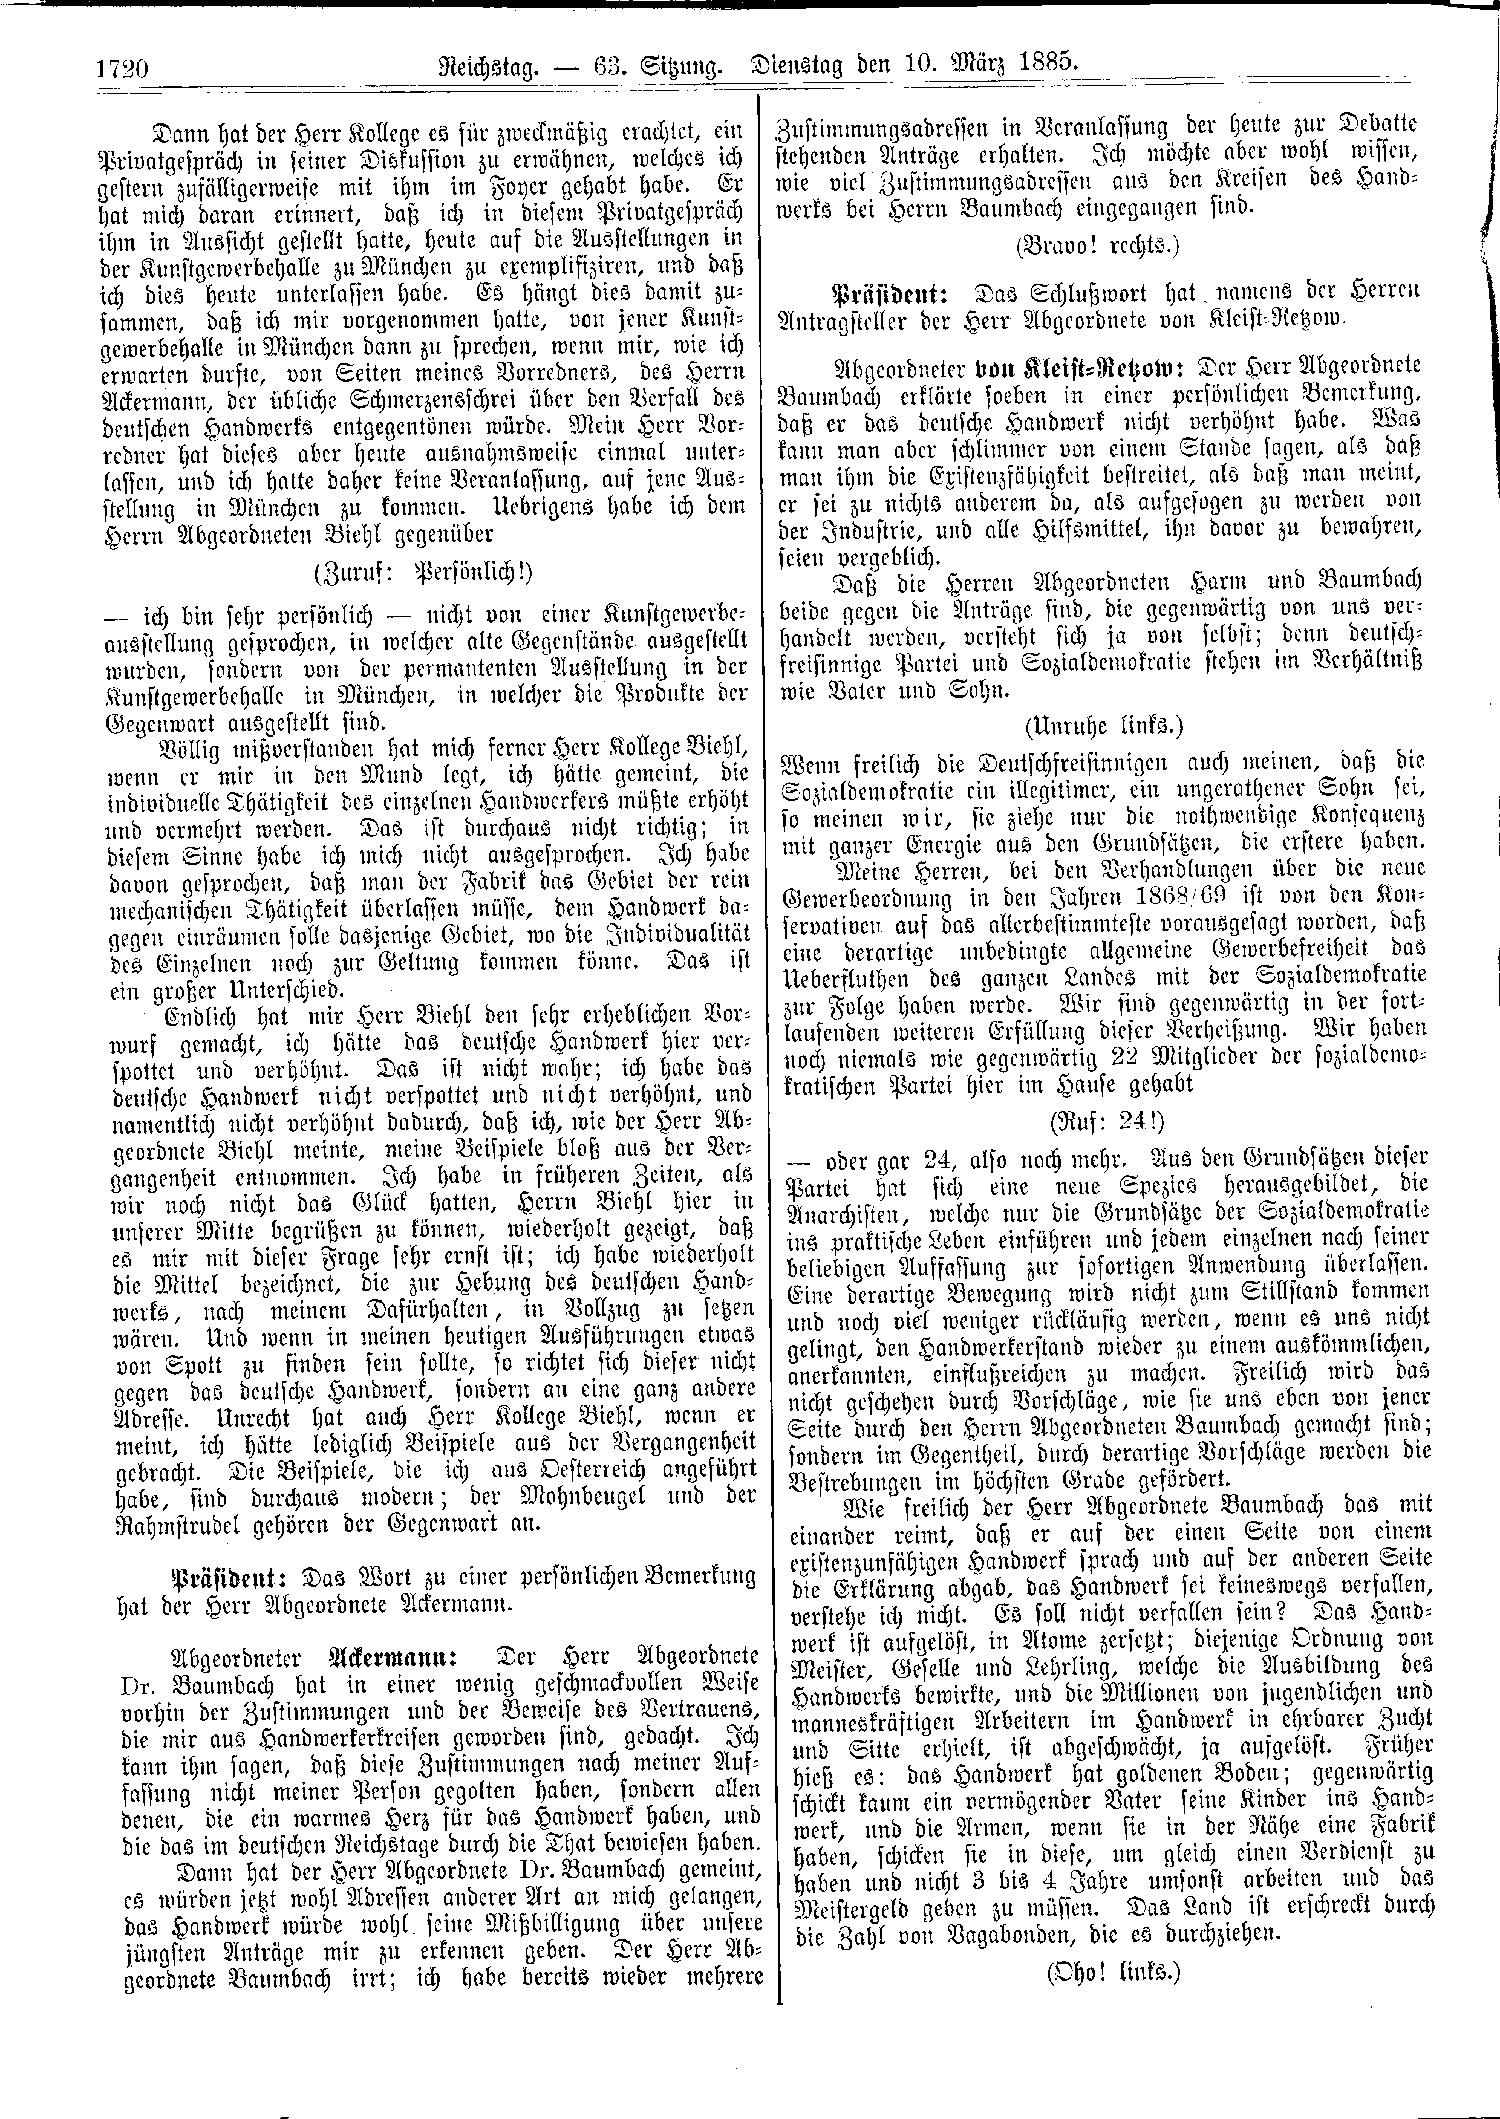 Scan of page 1720